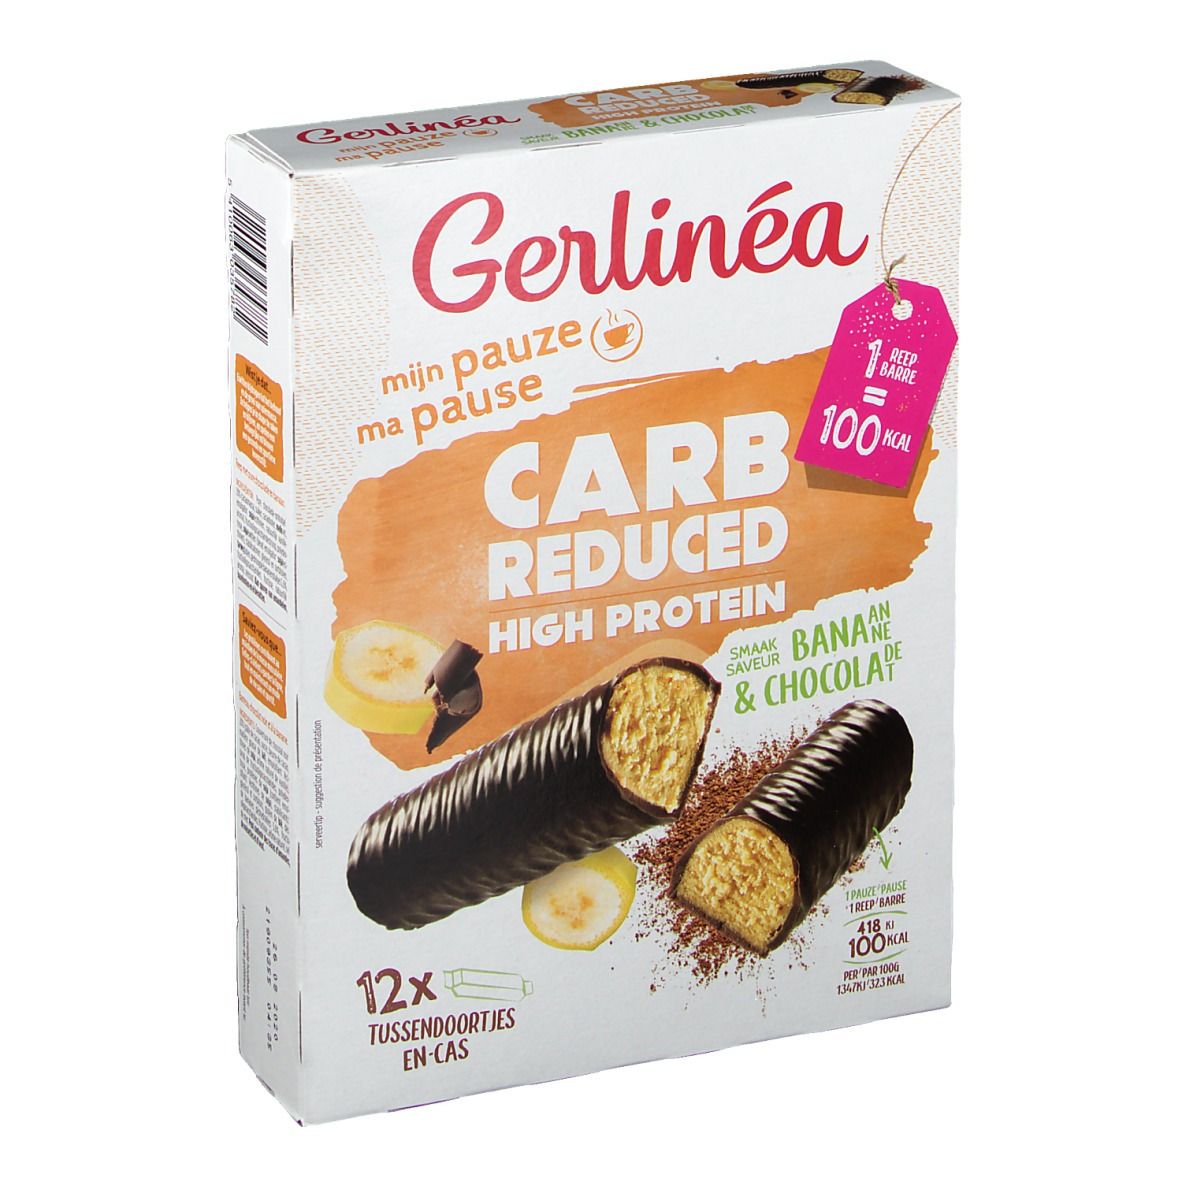 Gerlinéa Carb Reduced - High Protein Barres Chocolat & Banane